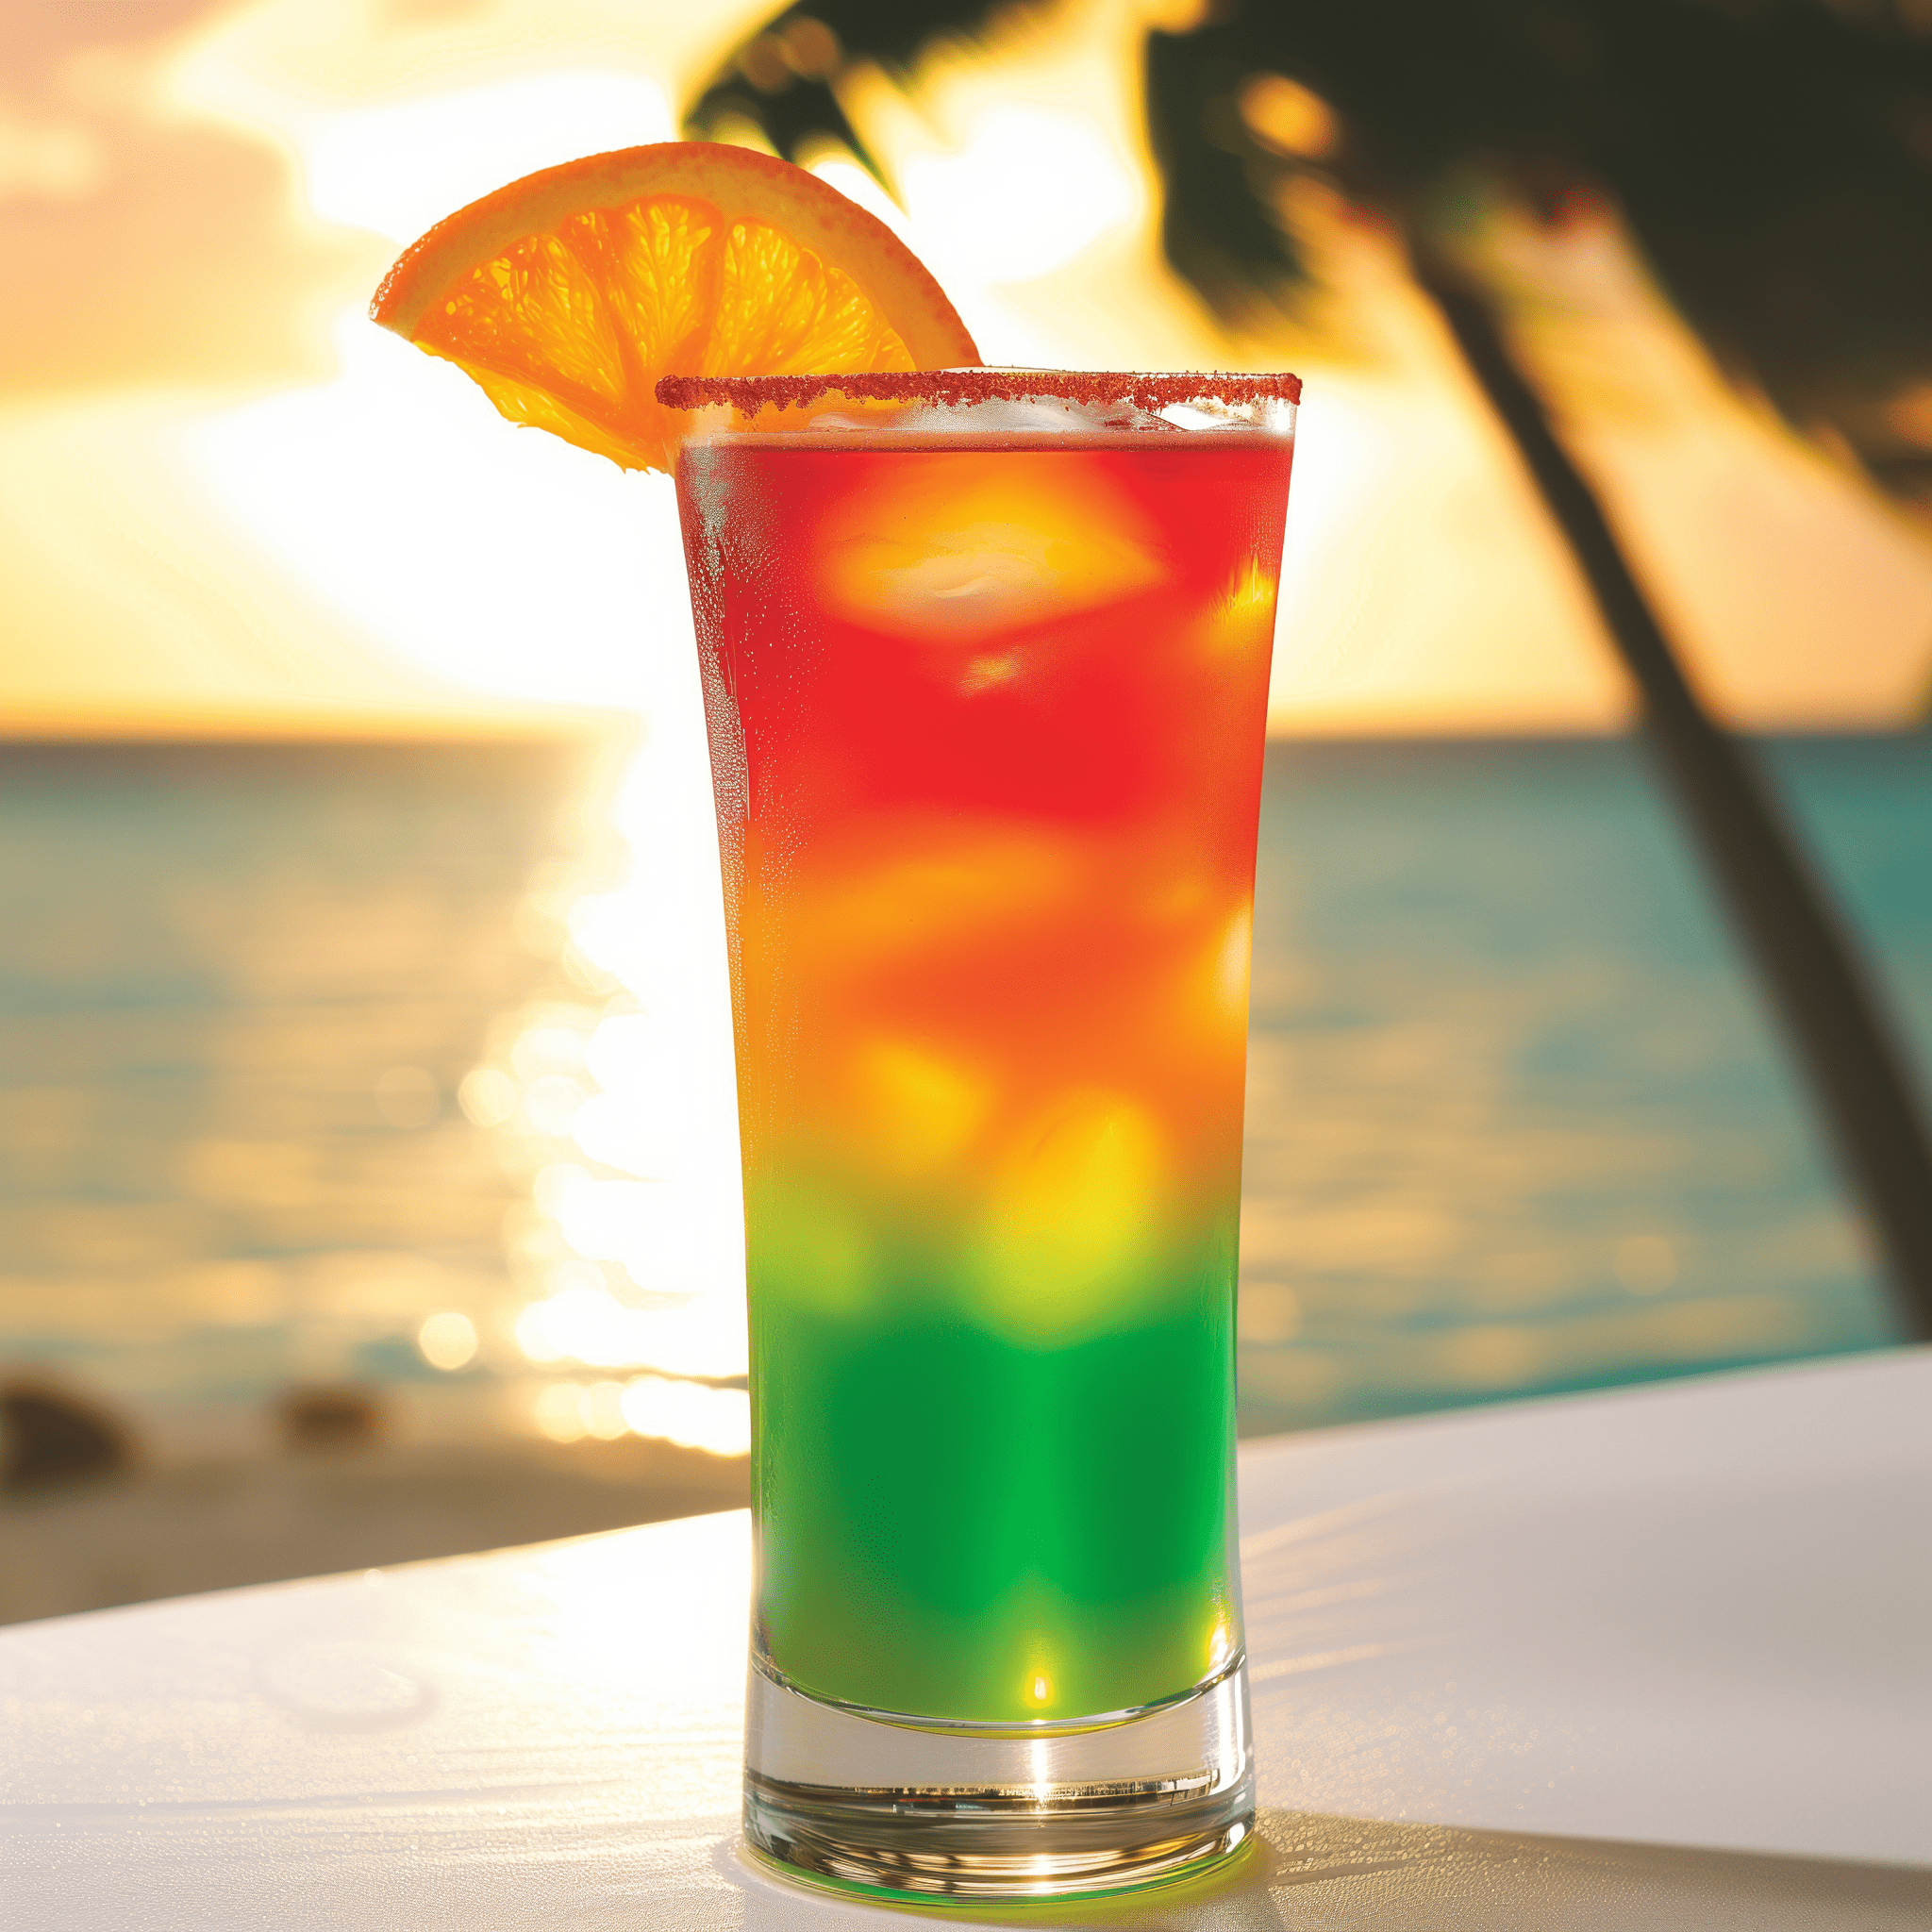 Key West Cooler Cocktail Recipe - The Key West Cooler offers a sweet and fruity flavor profile with a tropical twist, thanks to the coconut rum and melon liqueur. It's a light and refreshing drink with a subtle kick from the vodka.